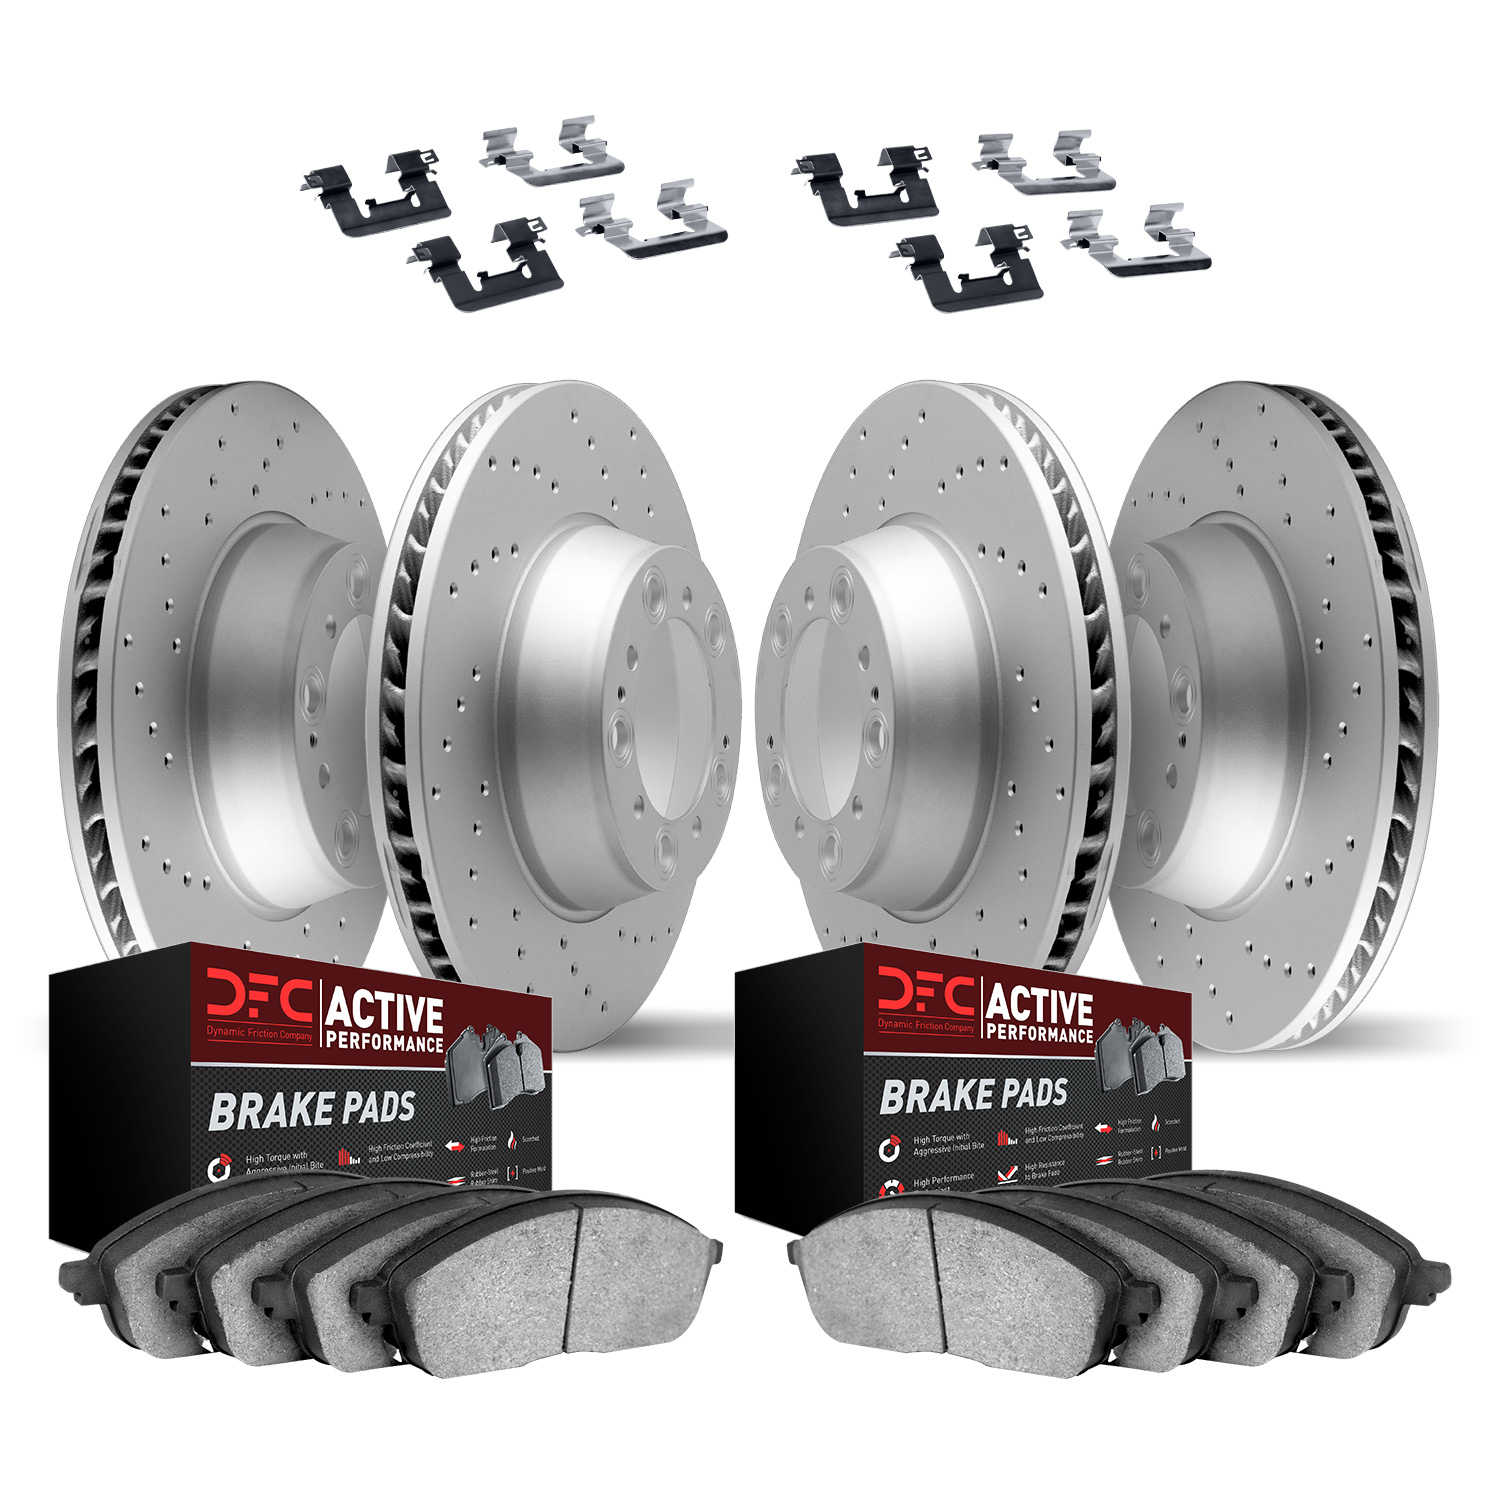 2714-31069 Geoperformance Drilled Brake Rotors with Active Performance Pads Kit & Hardware, 2004-2010 BMW, Position: Front and R